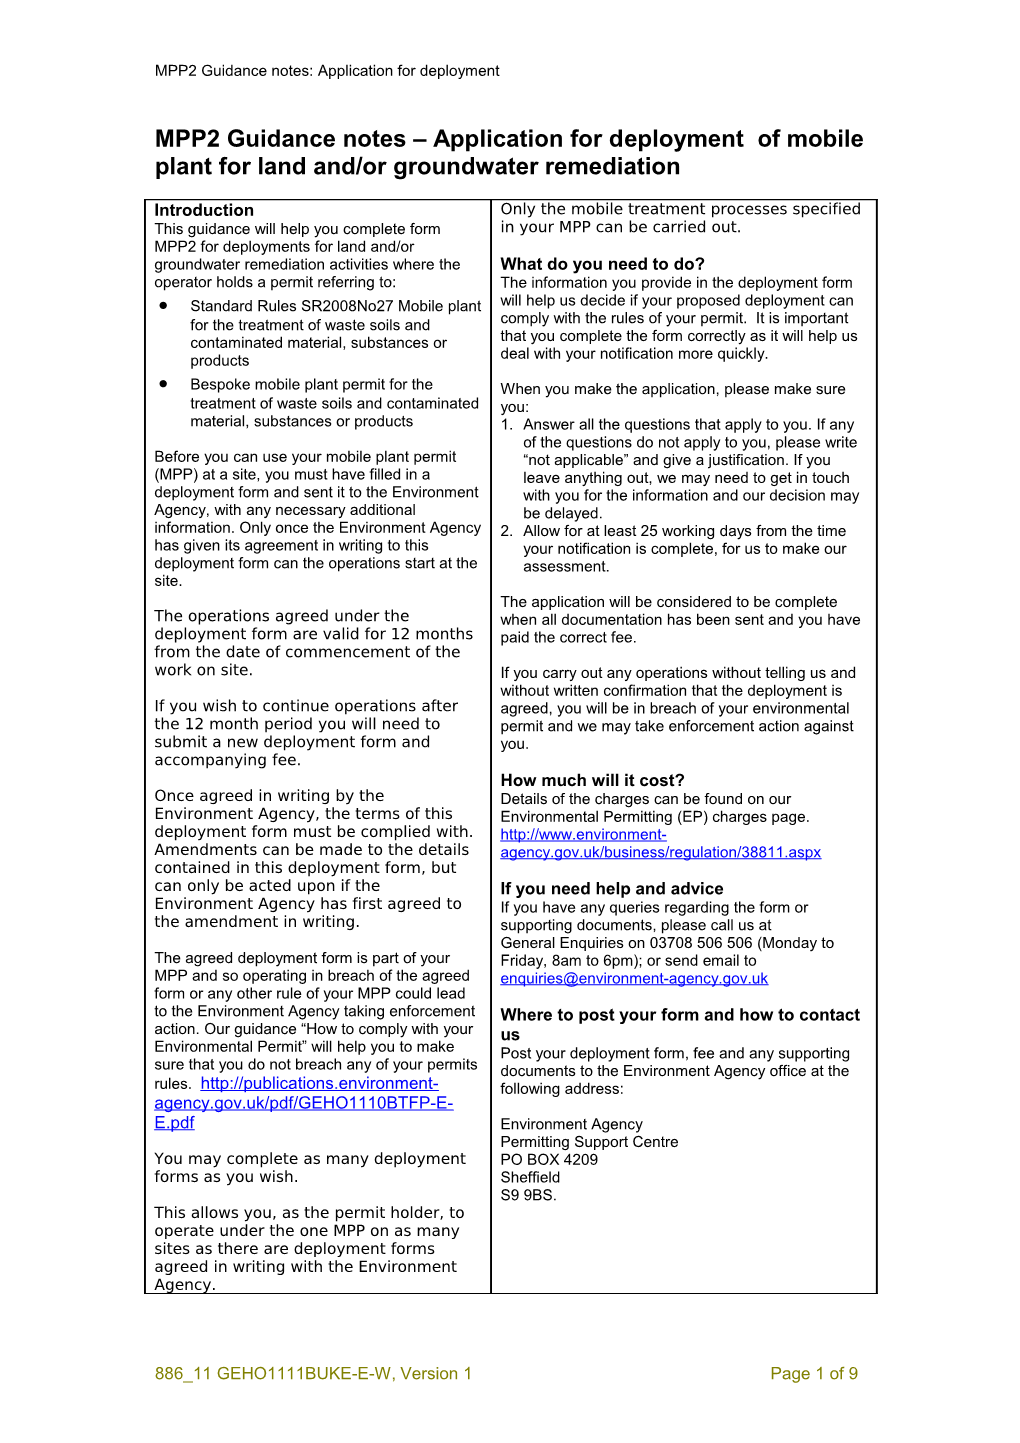 WML2 Guidance Notes Application for Deployment for Land And/Or Groundwater Remediation